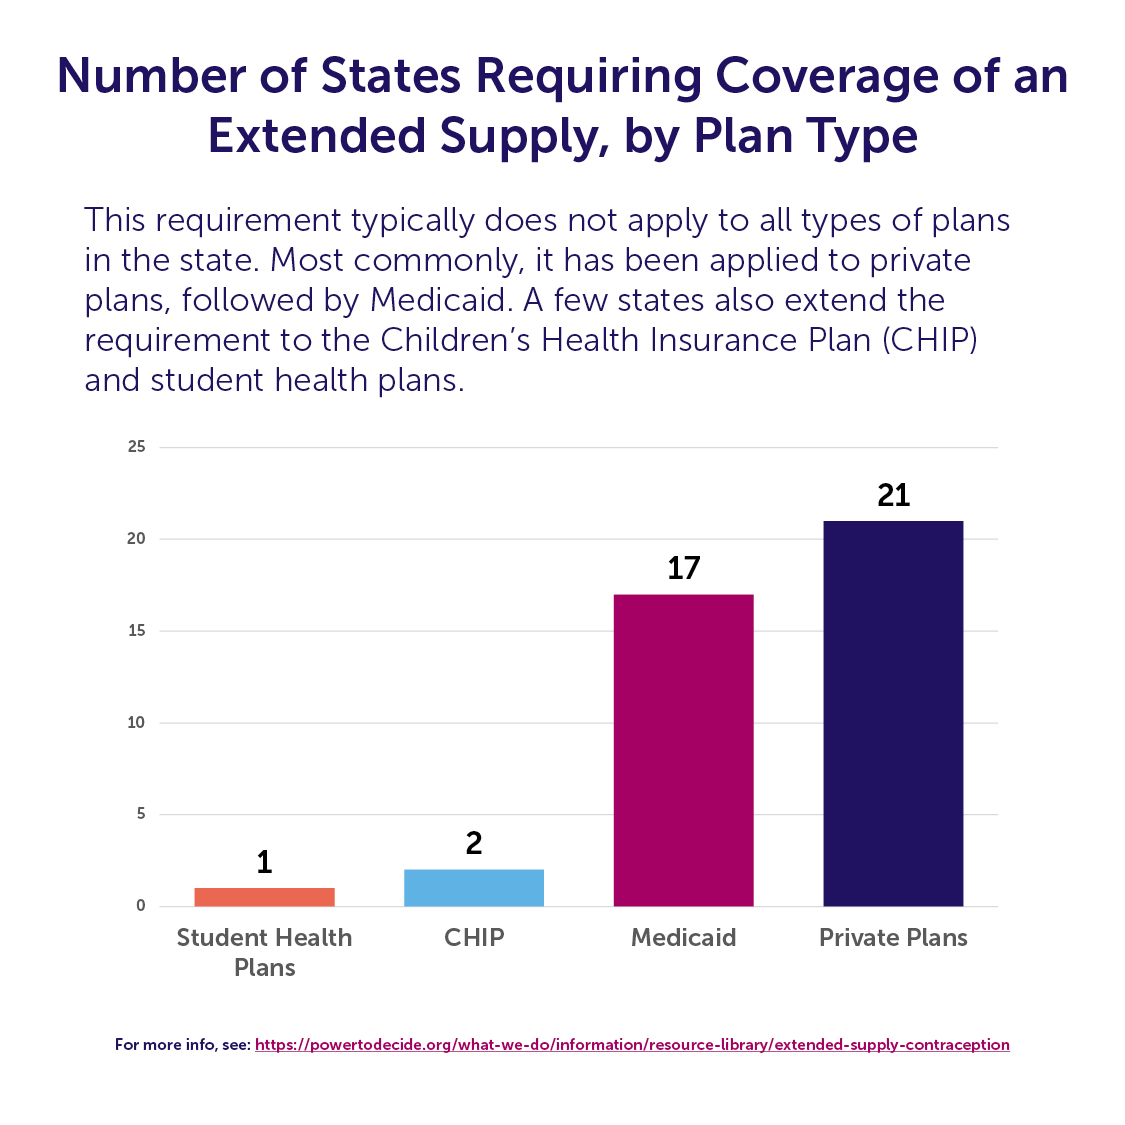 A bar graph showing the number of states requiring coverage of an extended supply by plan type. 